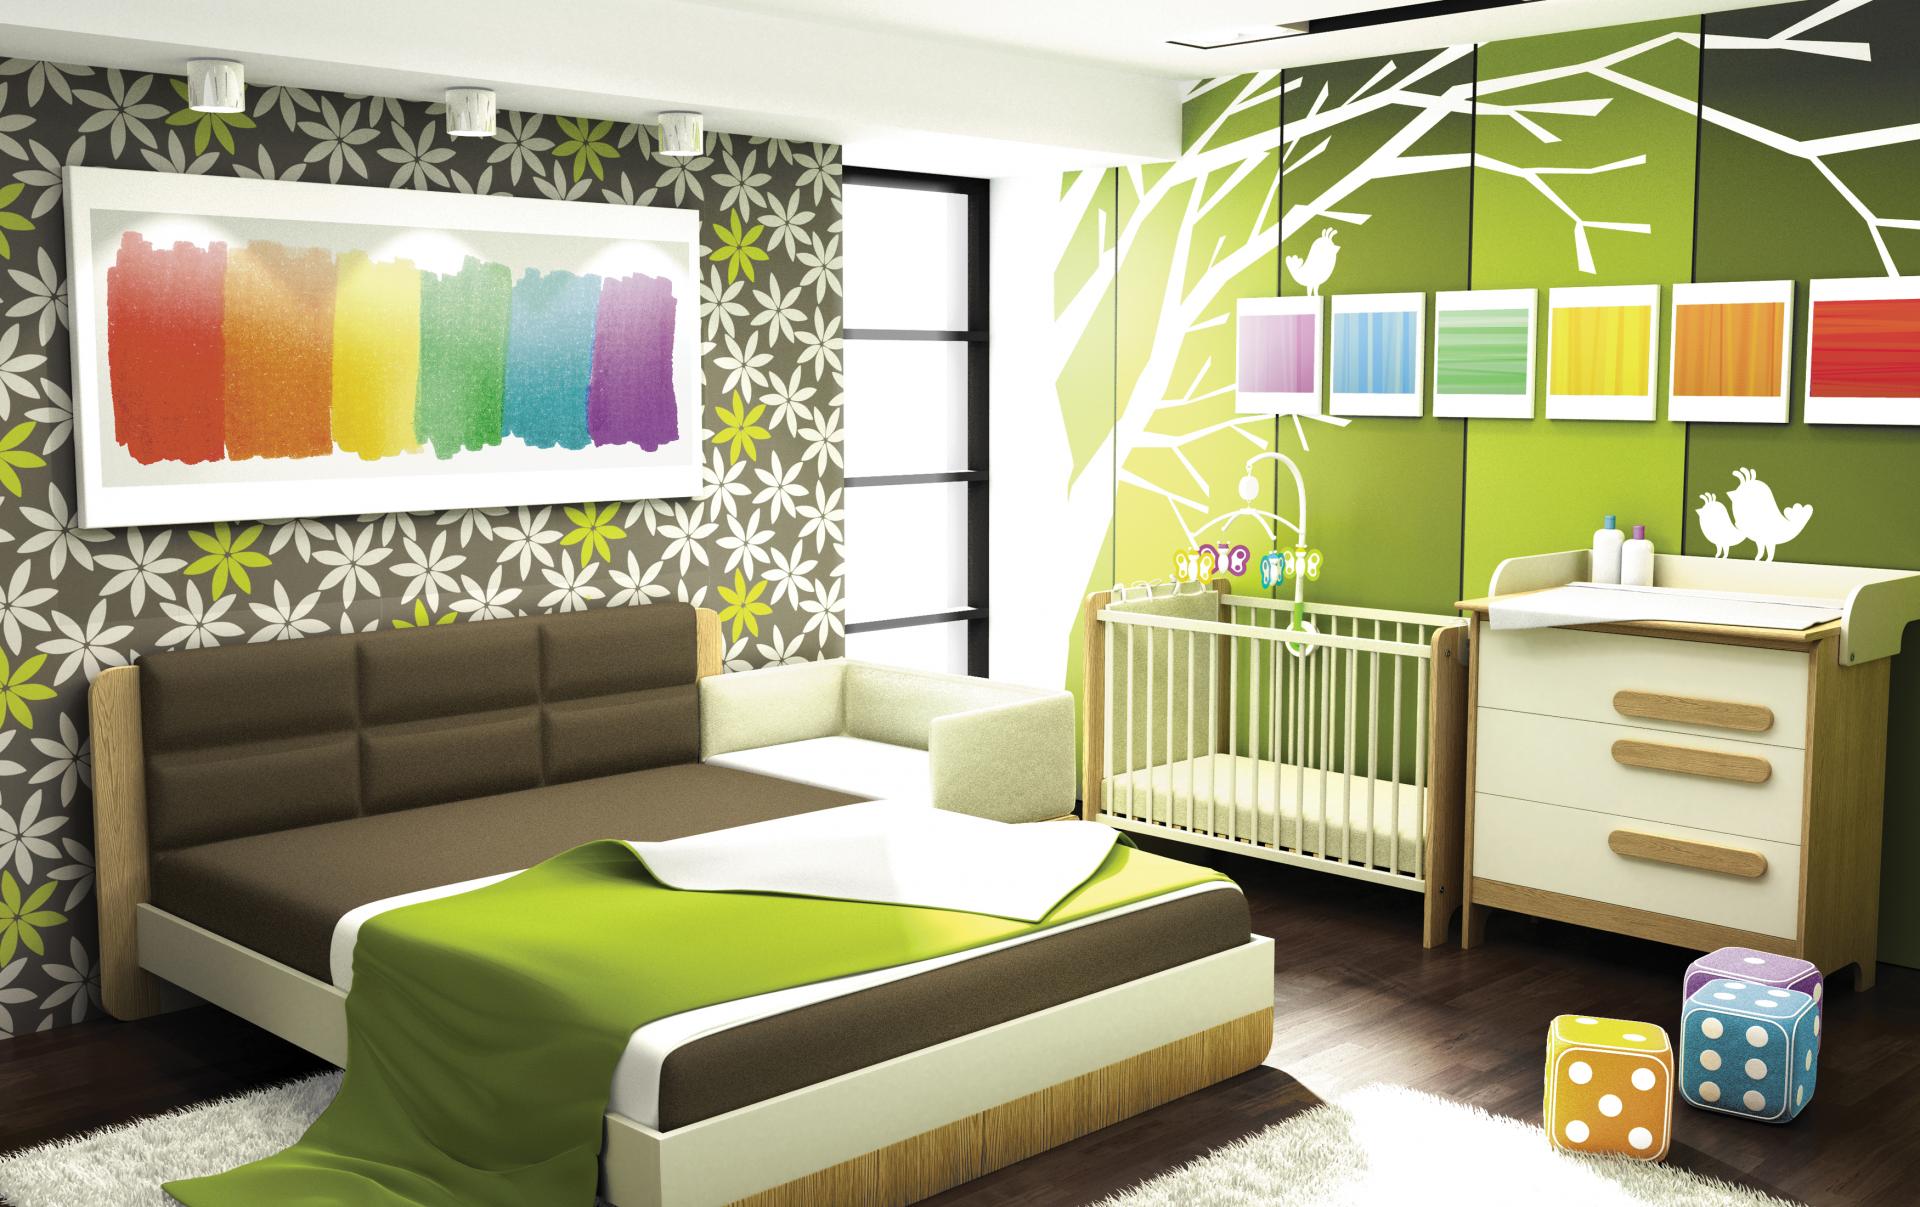 bedroom and children's room in the same room design ideas